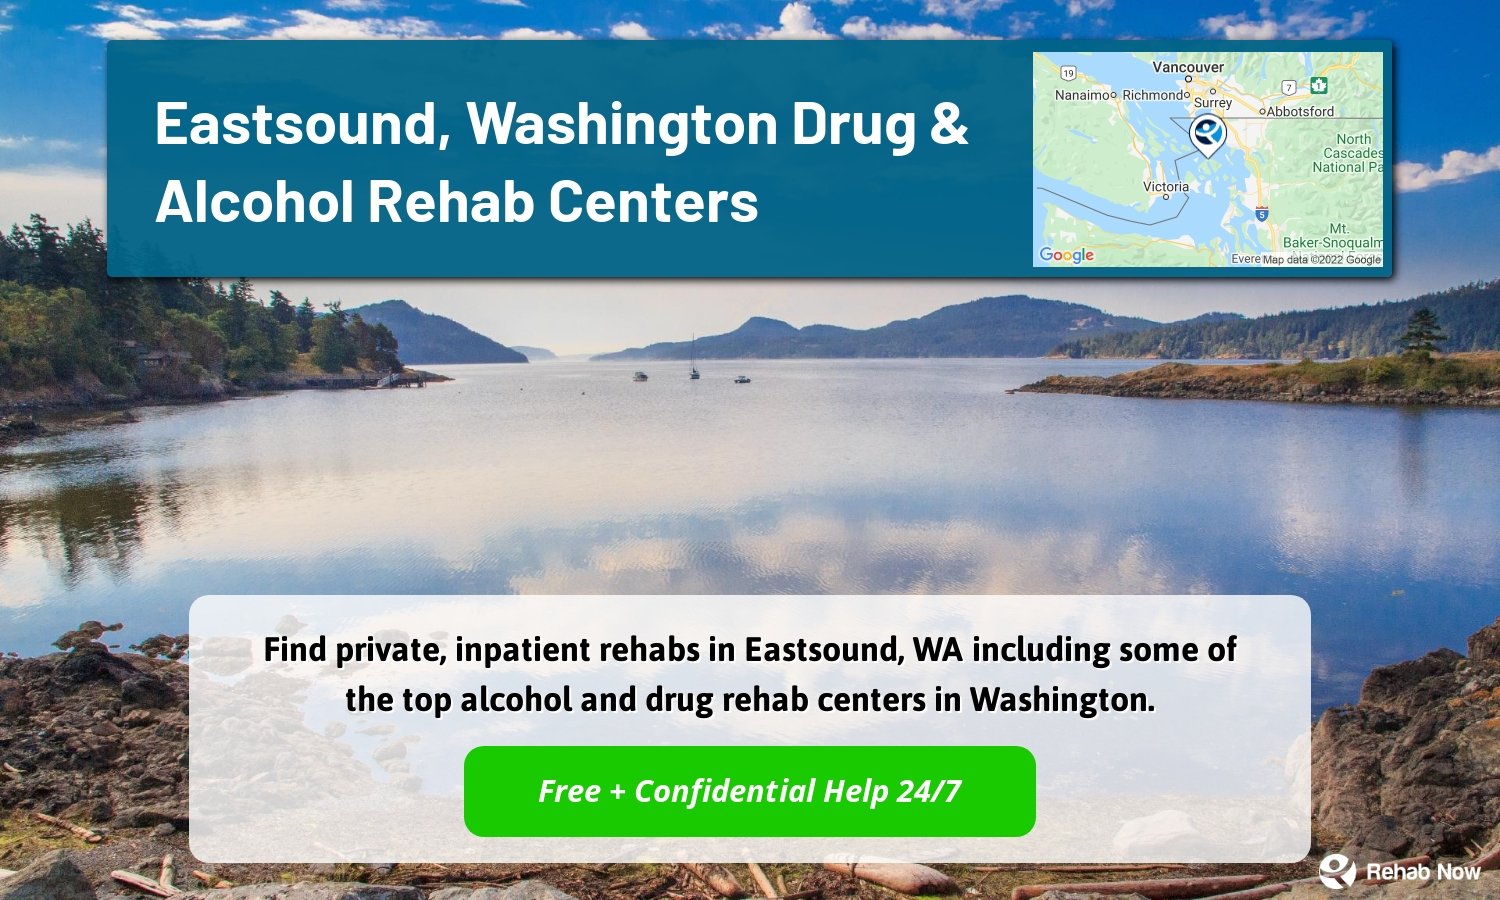 Find private, inpatient rehabs in Eastsound, WA including some of the top alcohol and drug rehab centers in Washington.